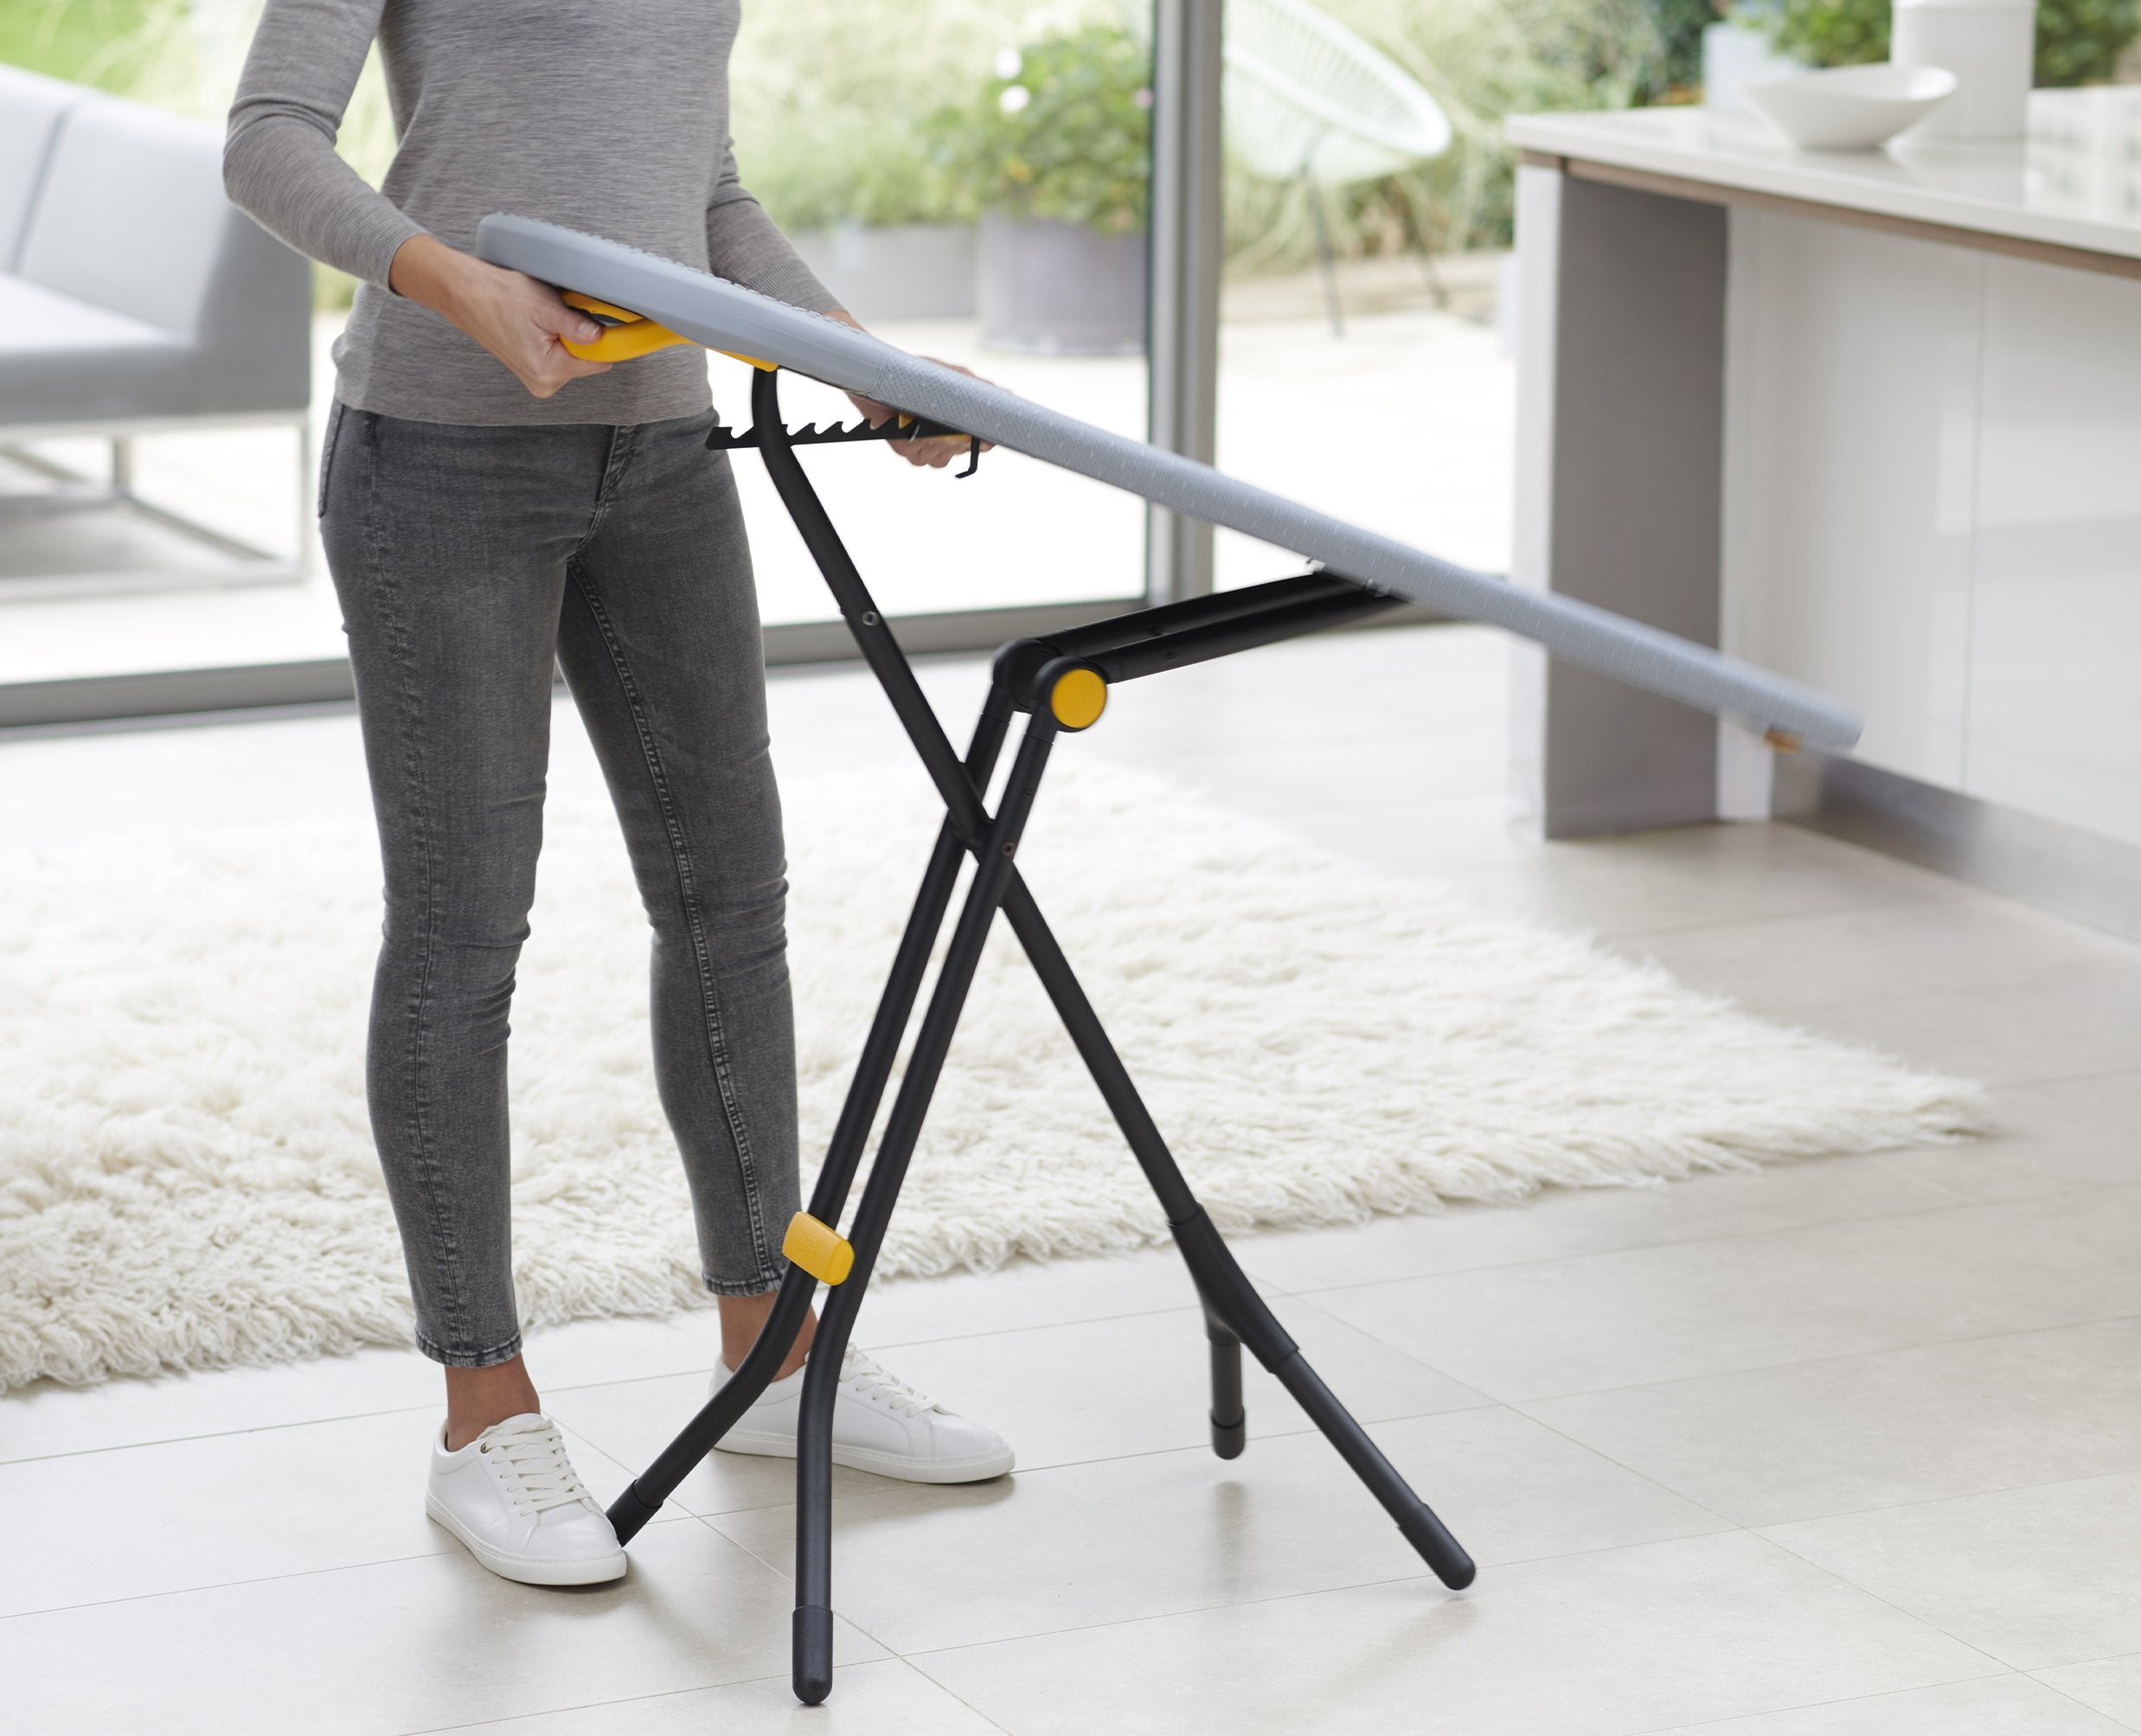 BEON.COM.AU Product Details This revolutionary, full-size ironing board features a unique stand design that makes it more compact when stored than other conventional ironing boards.  Compact and slimline when folded Fast, easy set-up and adjustable to seven height positions from 84cm (33 inches) to a maximum... Joseph Joseph at BEON.COM.AU